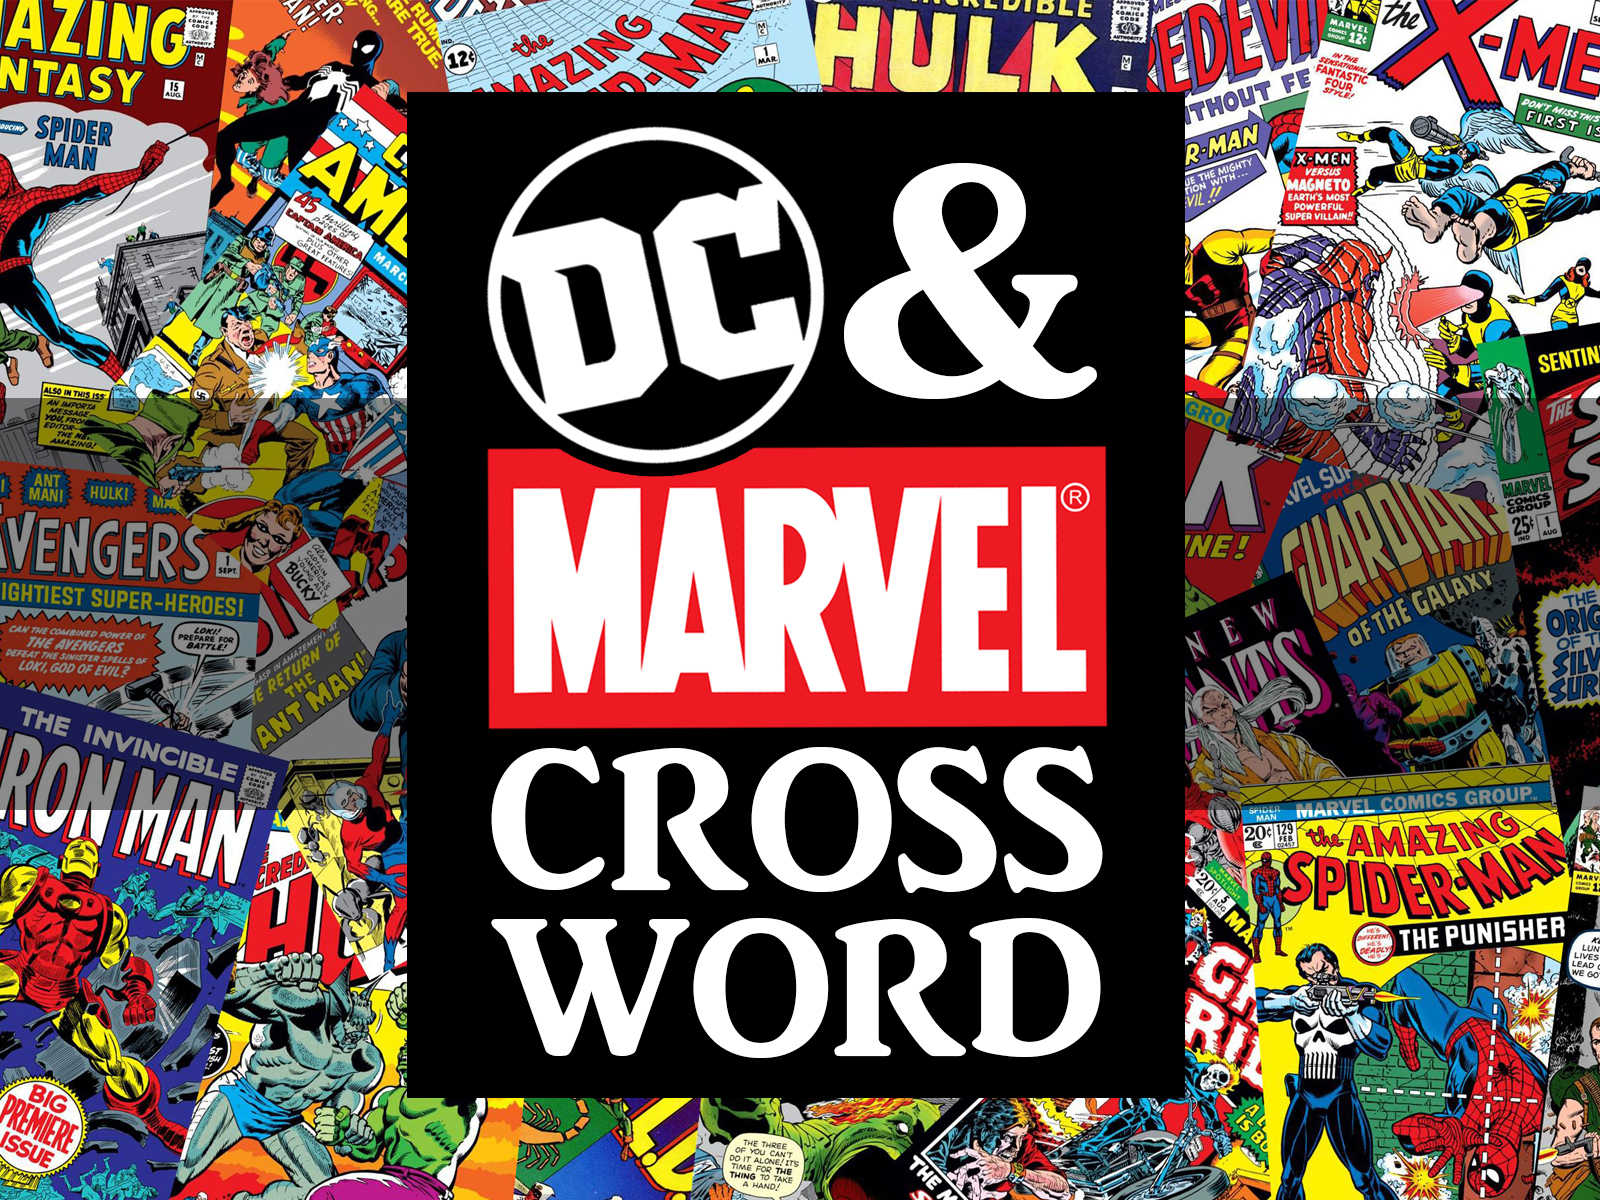 GRAPHIC: The words "DC & Marvel Crossword" are overlaid on a background of comic book covers. Graphic created by The Signal online editor, Krista Kamp.